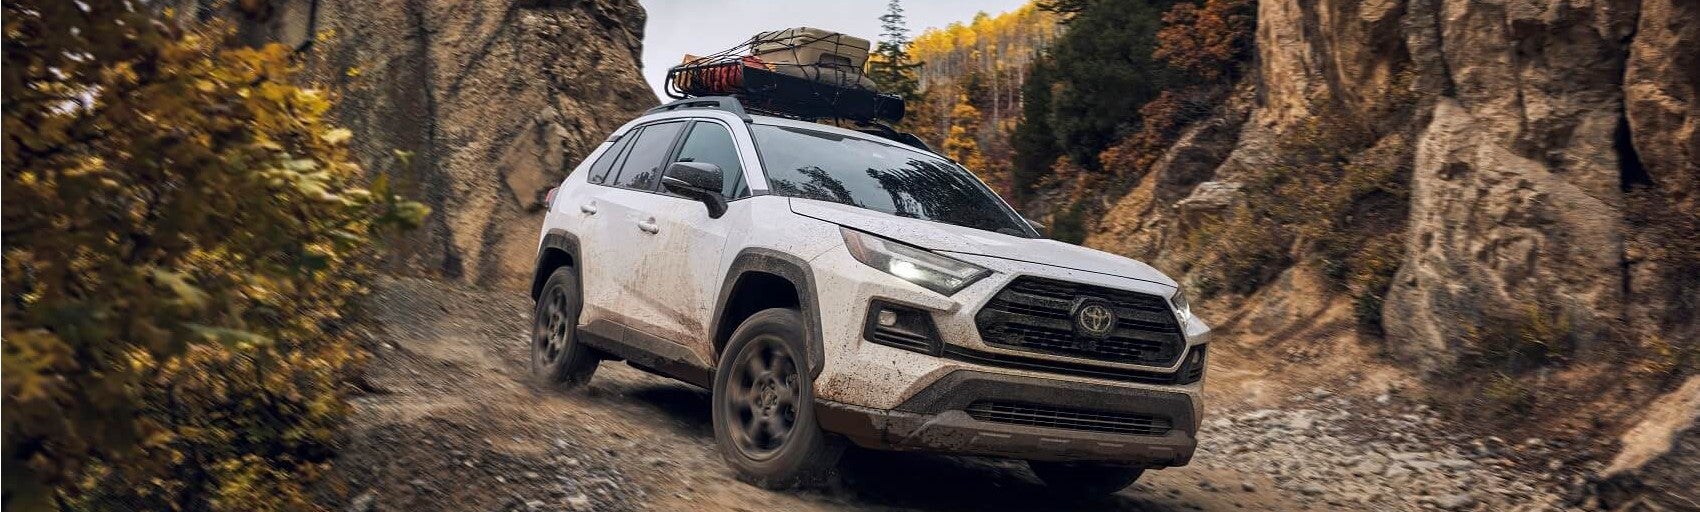 2022 Toyota RAV4 Off Road 1 Snipped